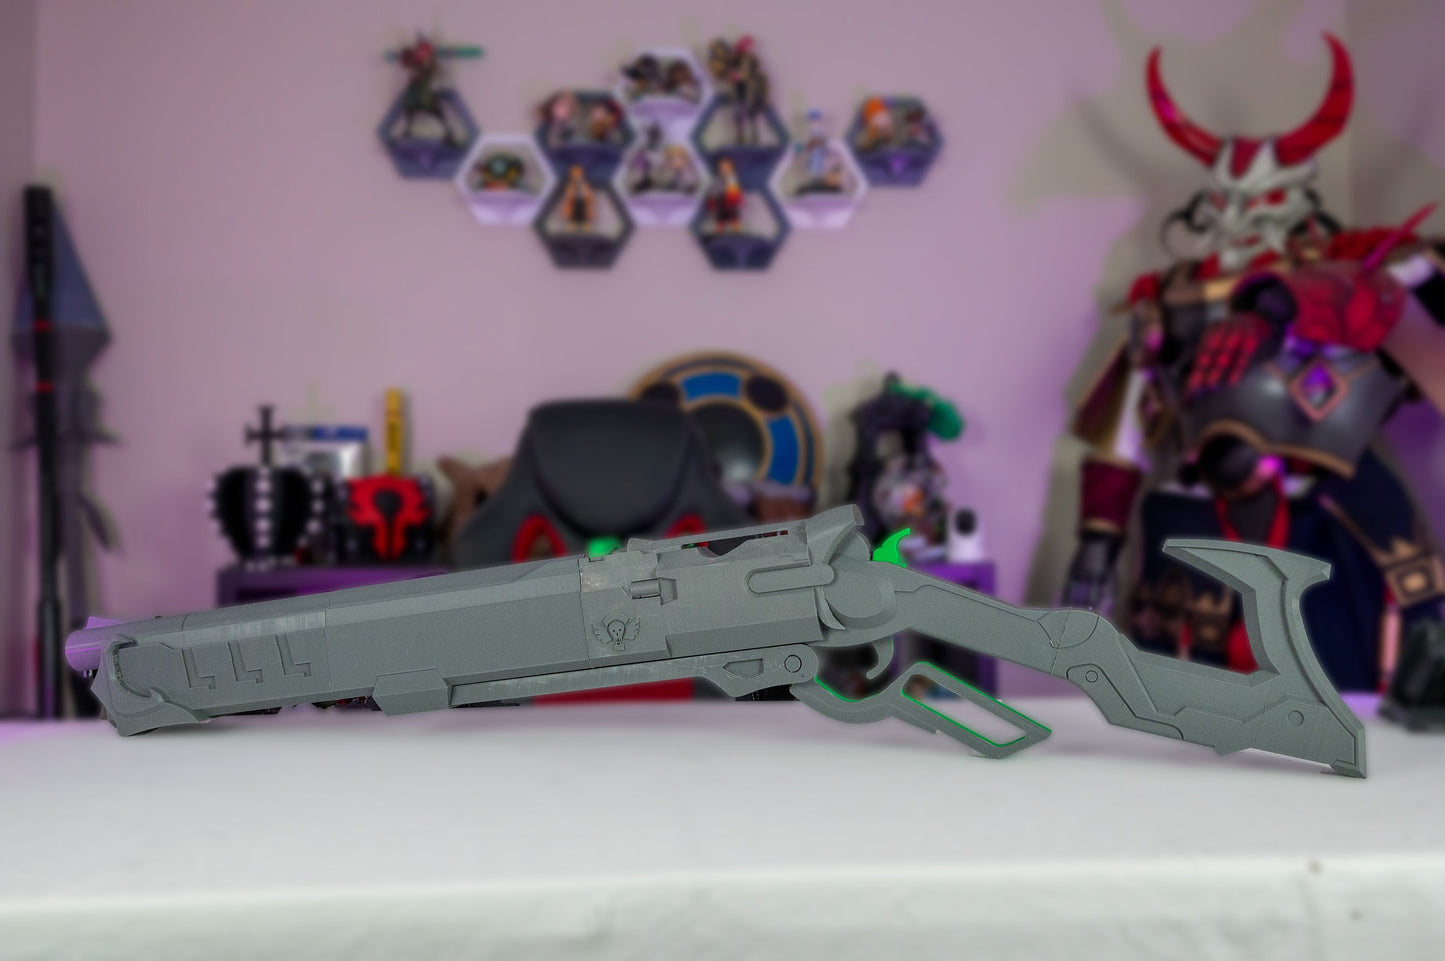 Full Sized Viper Overwatch Cosplay Prop 3D Printed